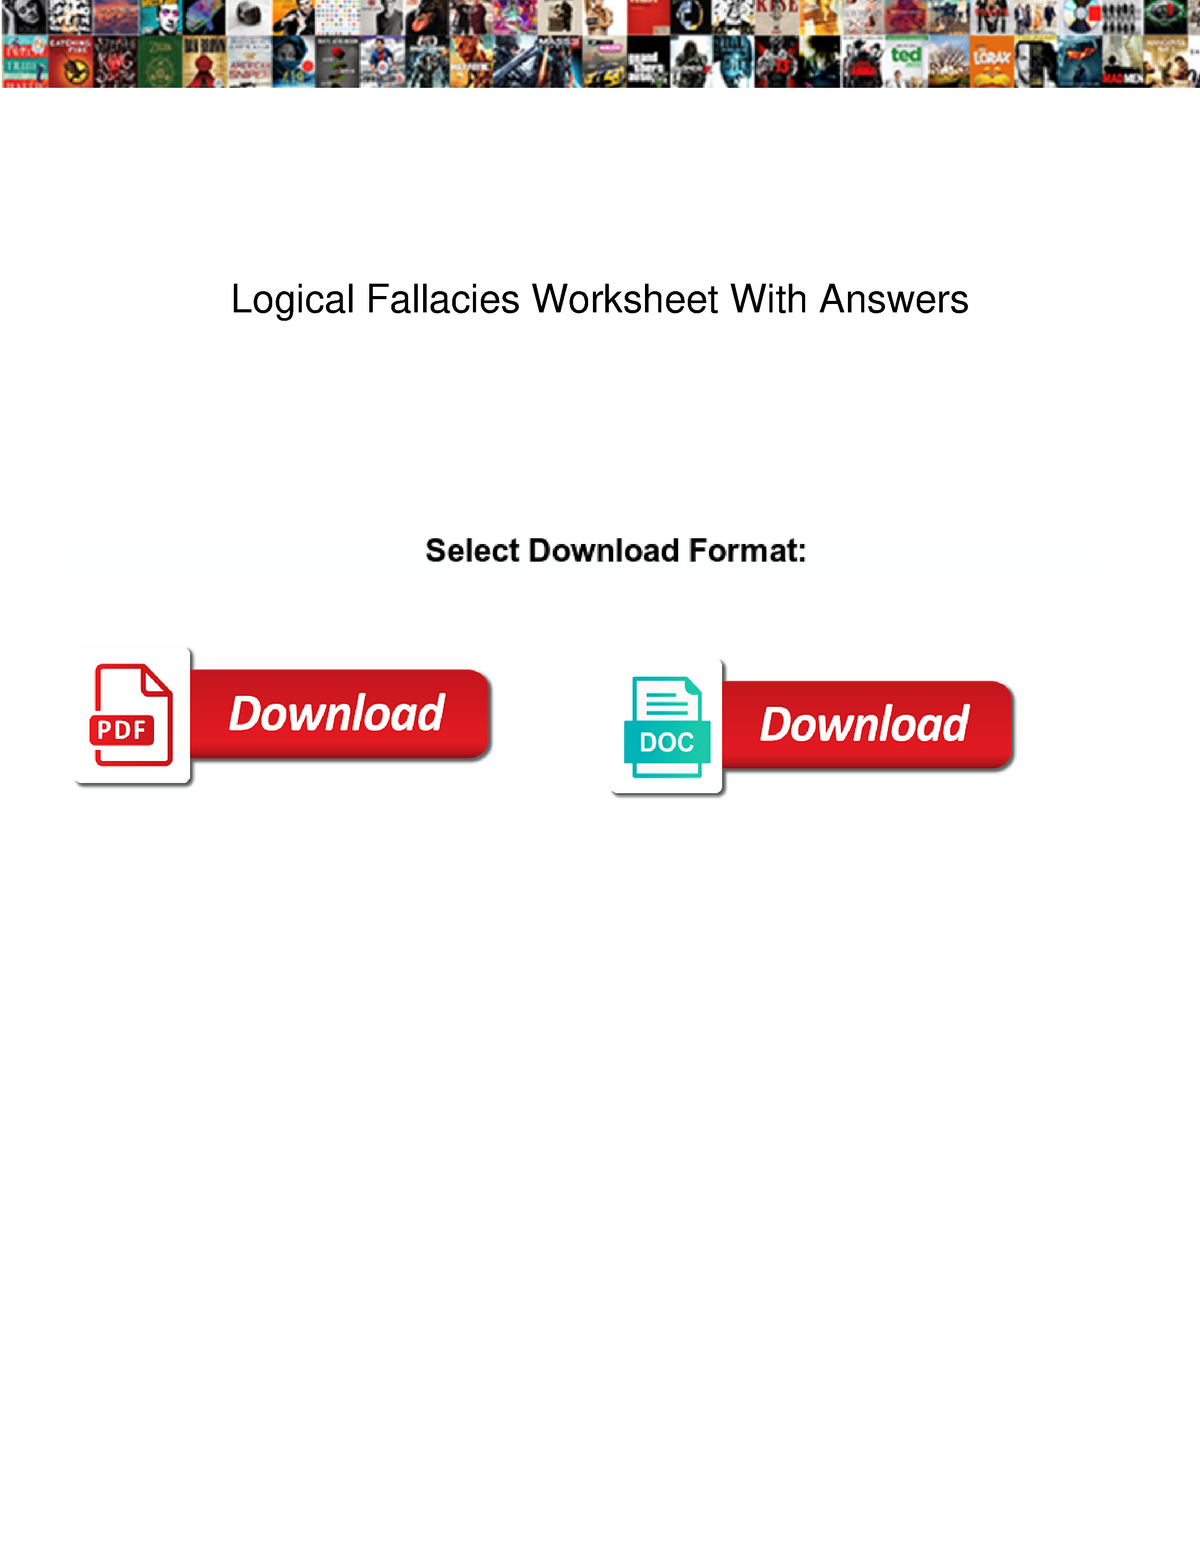 logical-fallacies-worksheet-with-answers-logical-fallacies-worksheet-with-answers-roasted